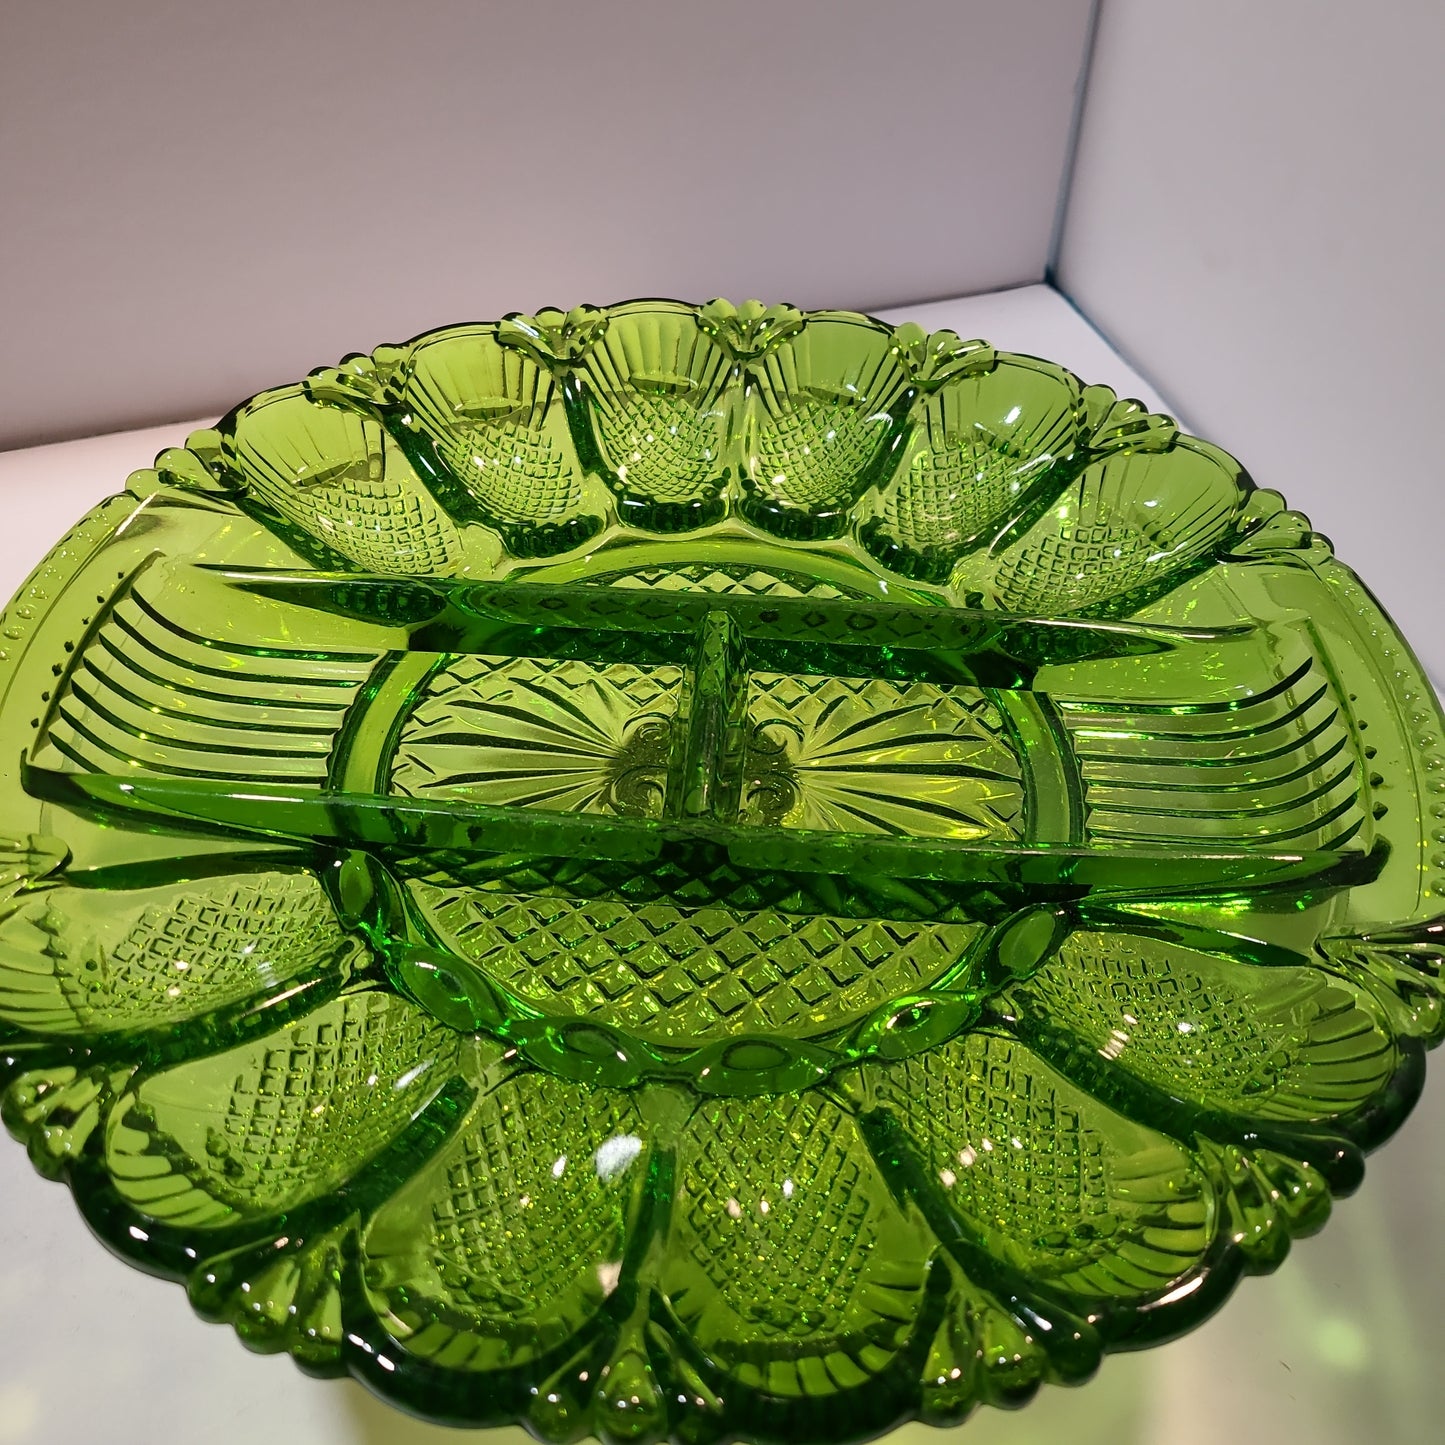 Vintage green glass deviled egg and relish tray